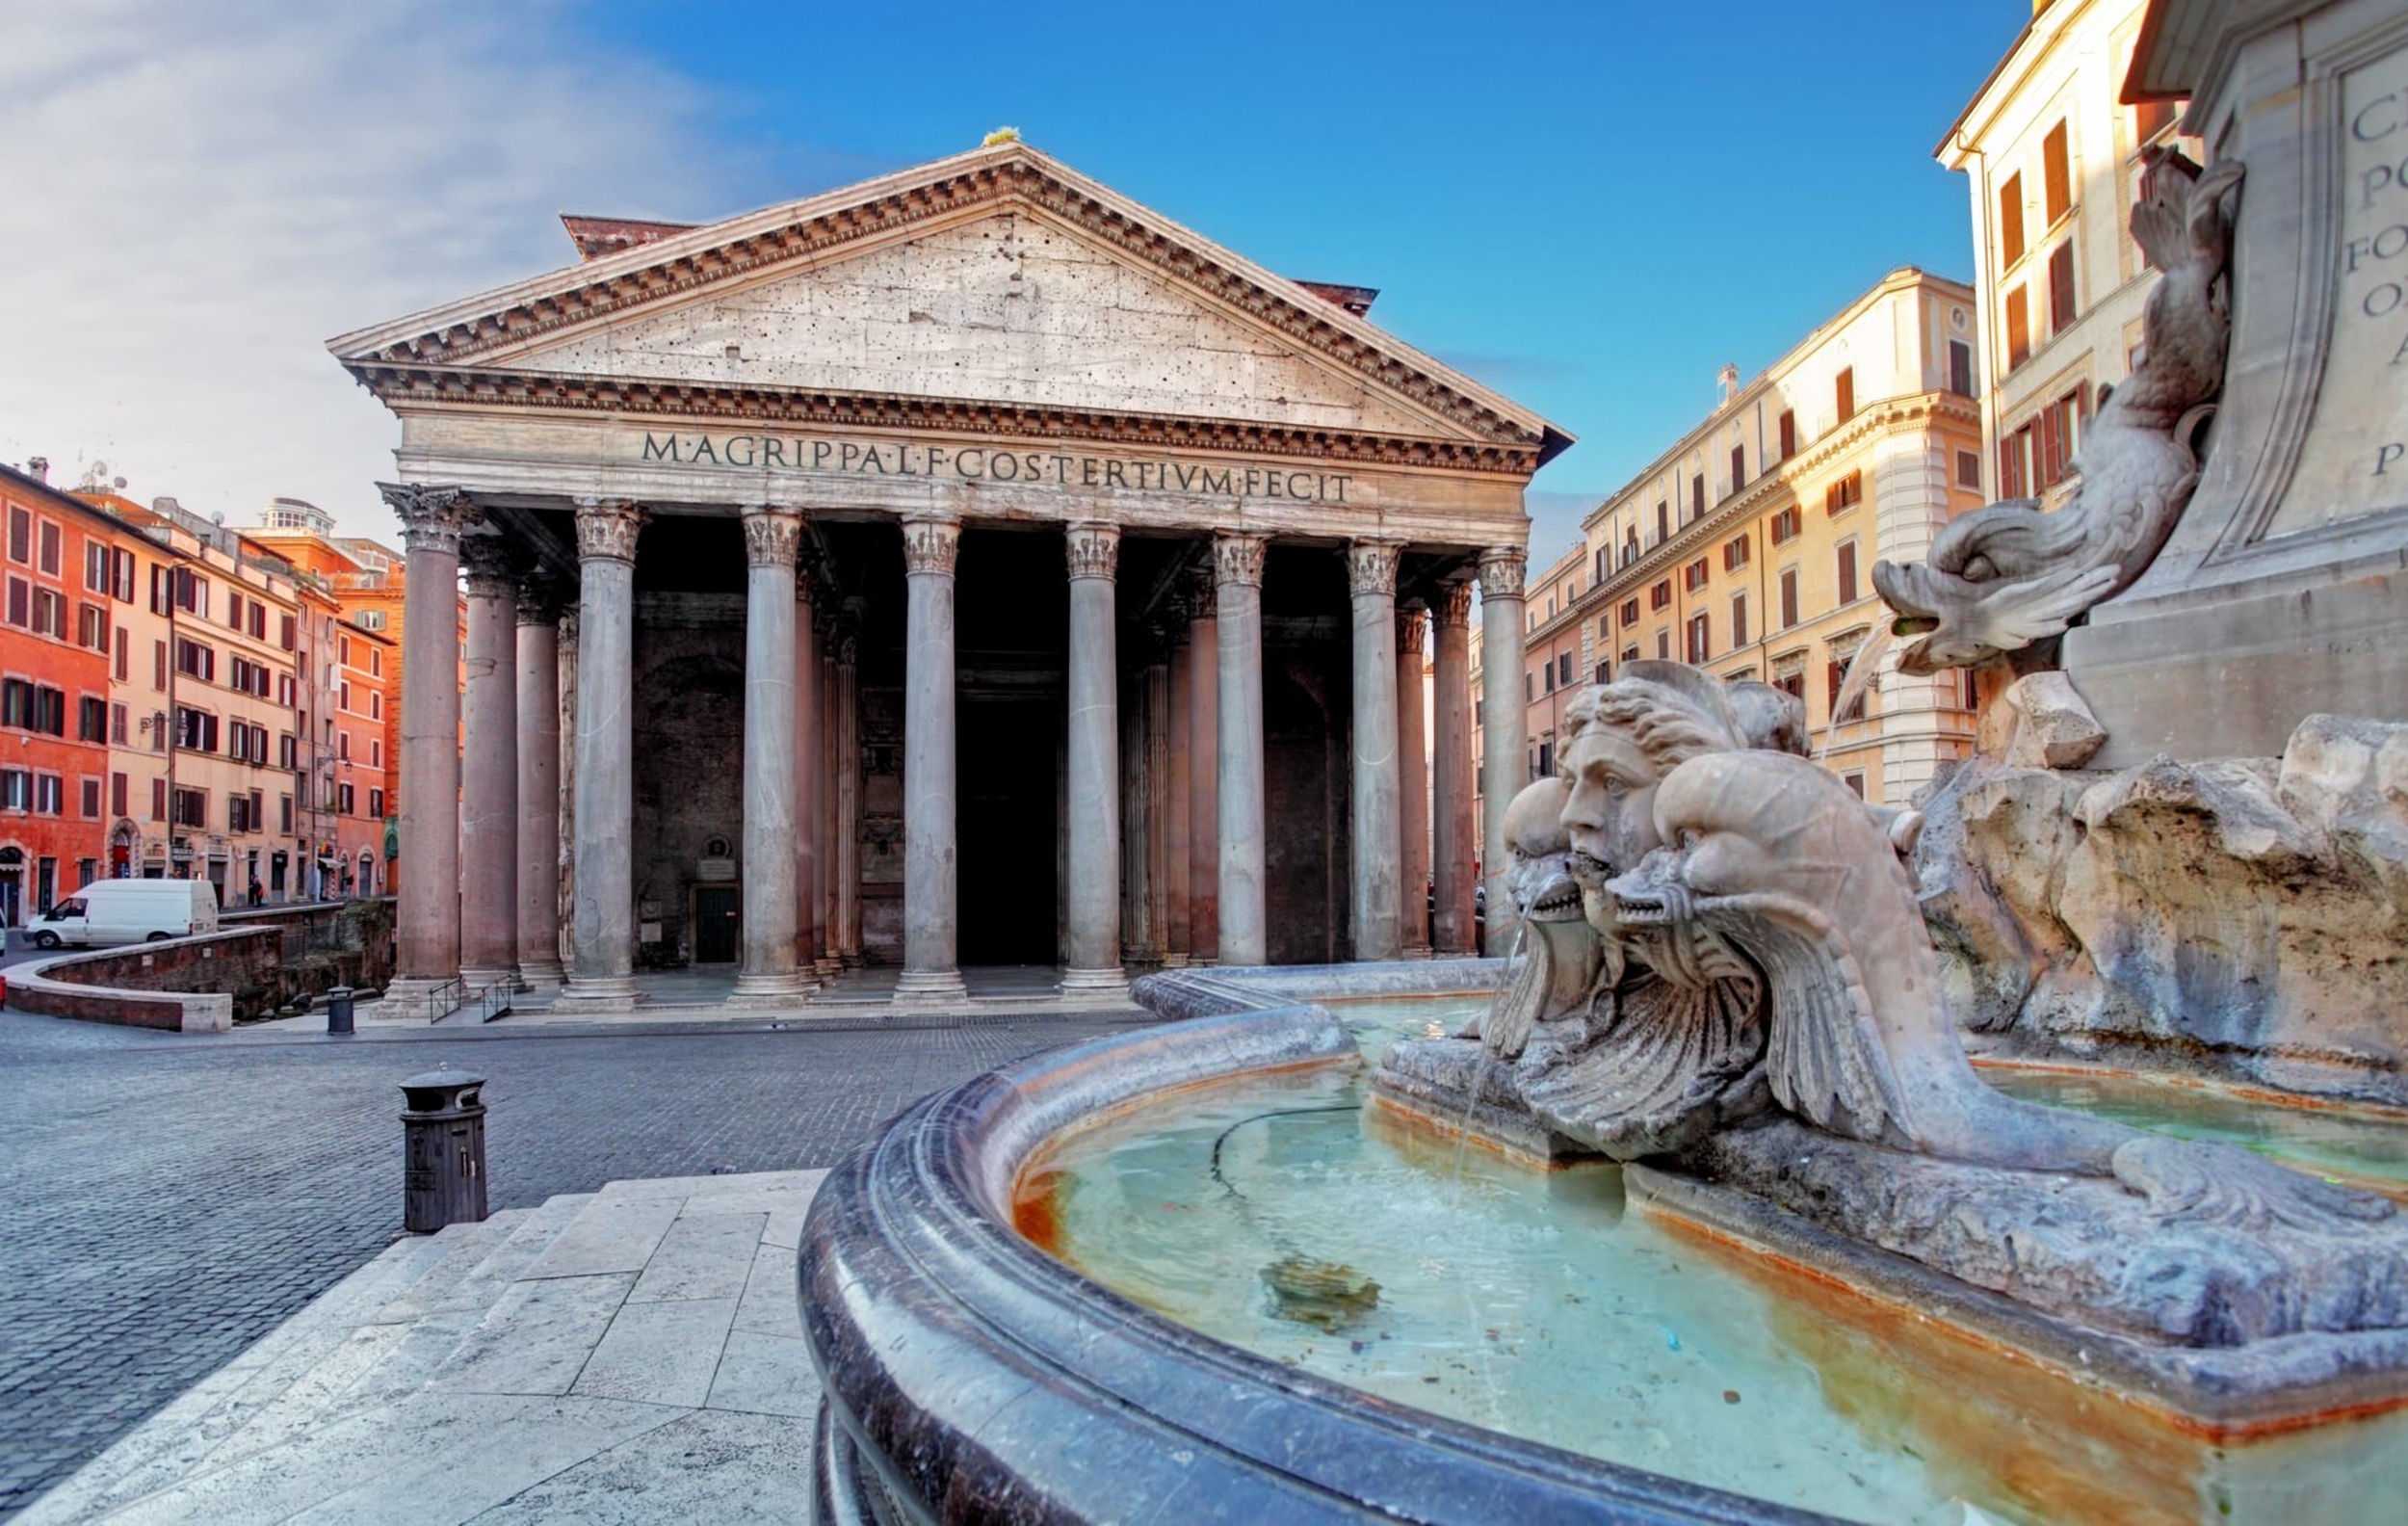 <p>Let's be clear: Rome's Pantheon is not just another temple. It is the city's most important landmark, built in 125 AD and boasting some of the most epic pillars on earth. These things make the White House look small, and no trip is complete without a picture of its facade. </p><p><a href='https://www.msn.com/en-us/community/channel/vid-cj9pqbr0vn9in2b6ddcd8sfgpfq6x6utp44fssrv6mc2gtybw0us'>Follow us on MSN to see more of our exclusive lifestyle content.</a></p>